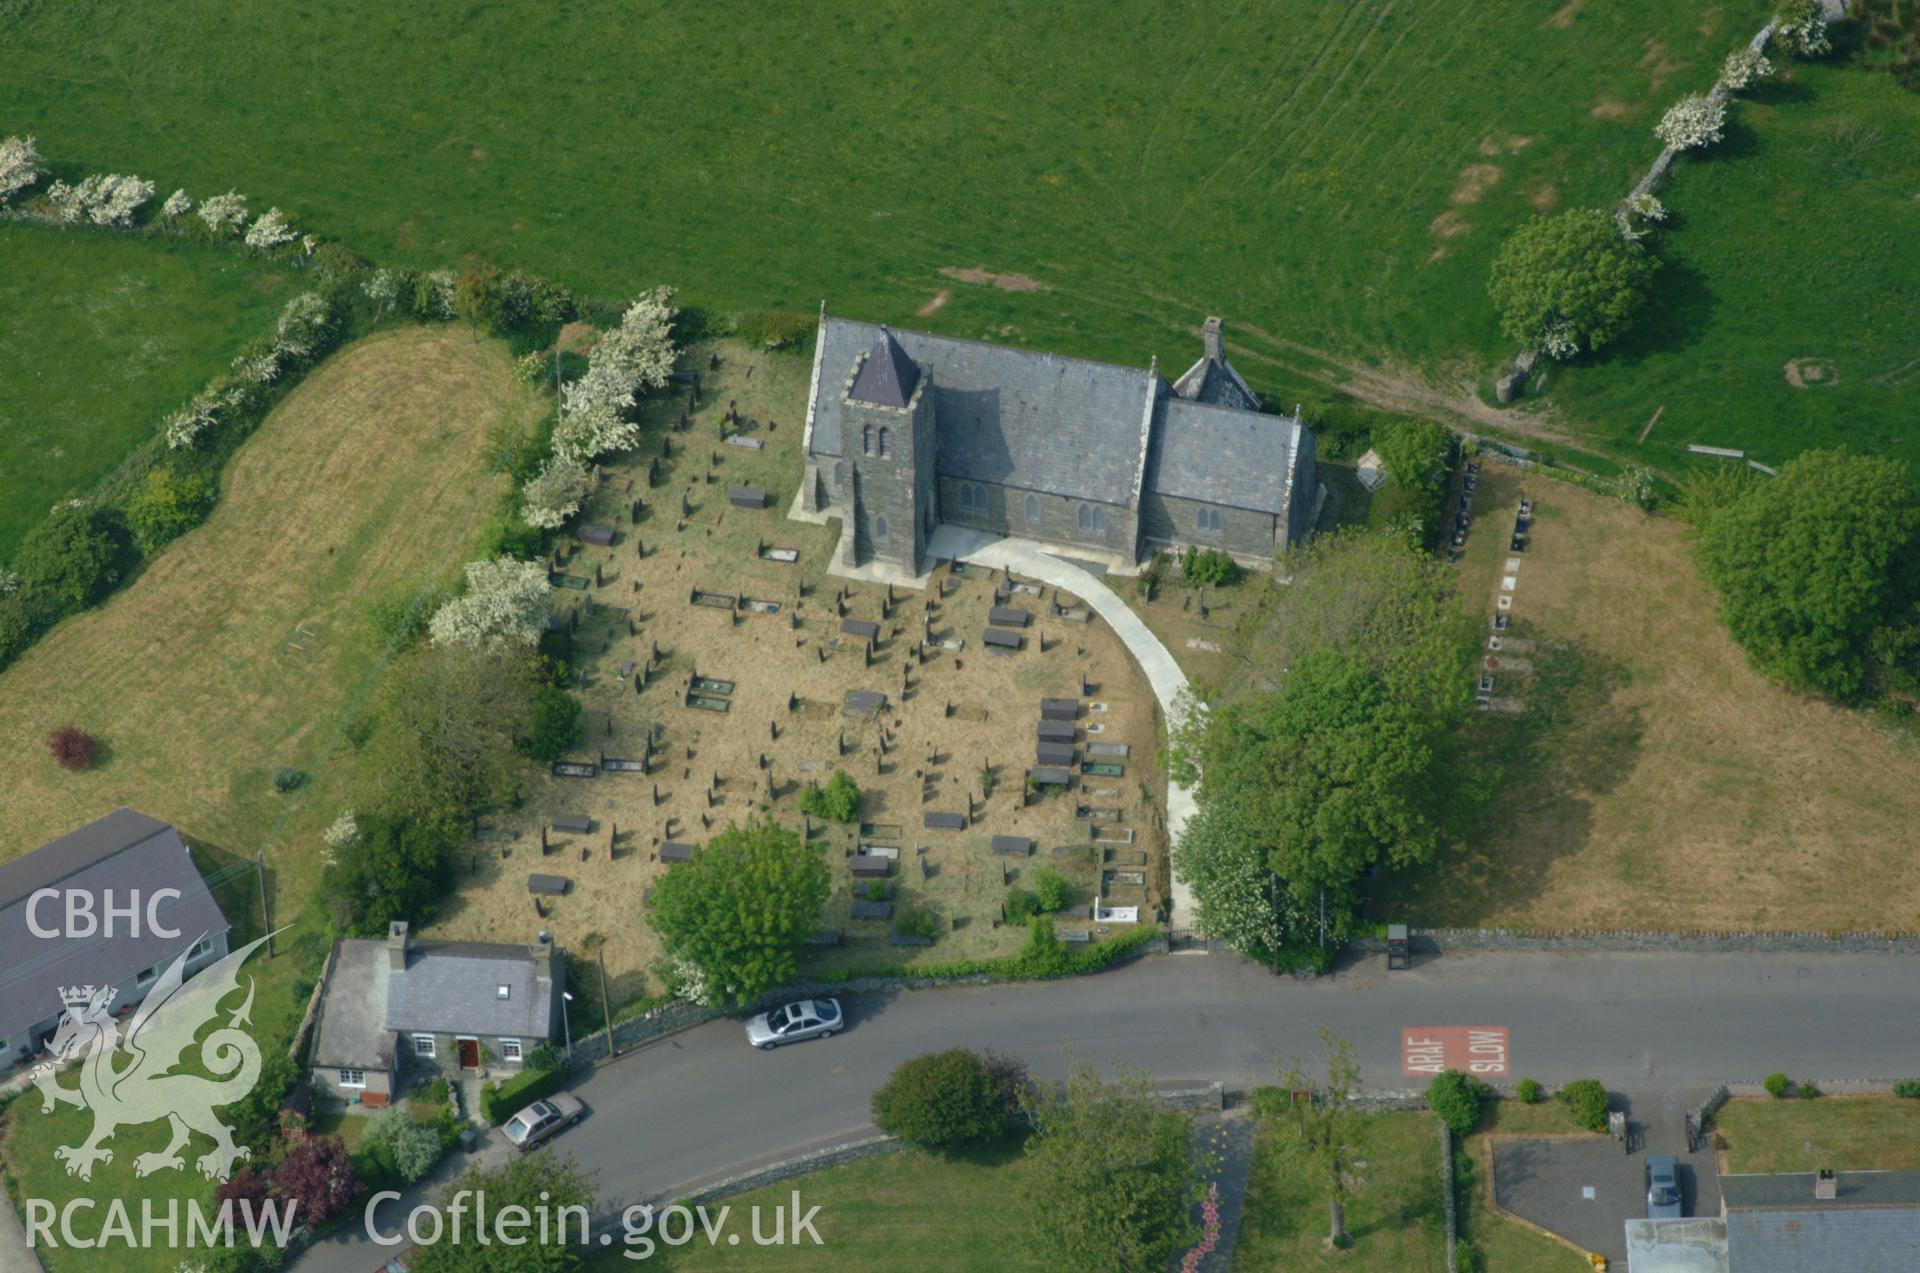 RCAHMW colour oblique aerial photograph of Saints Marcellus and Marcellinus' Church taken on 26/05/2004 by Toby Driver